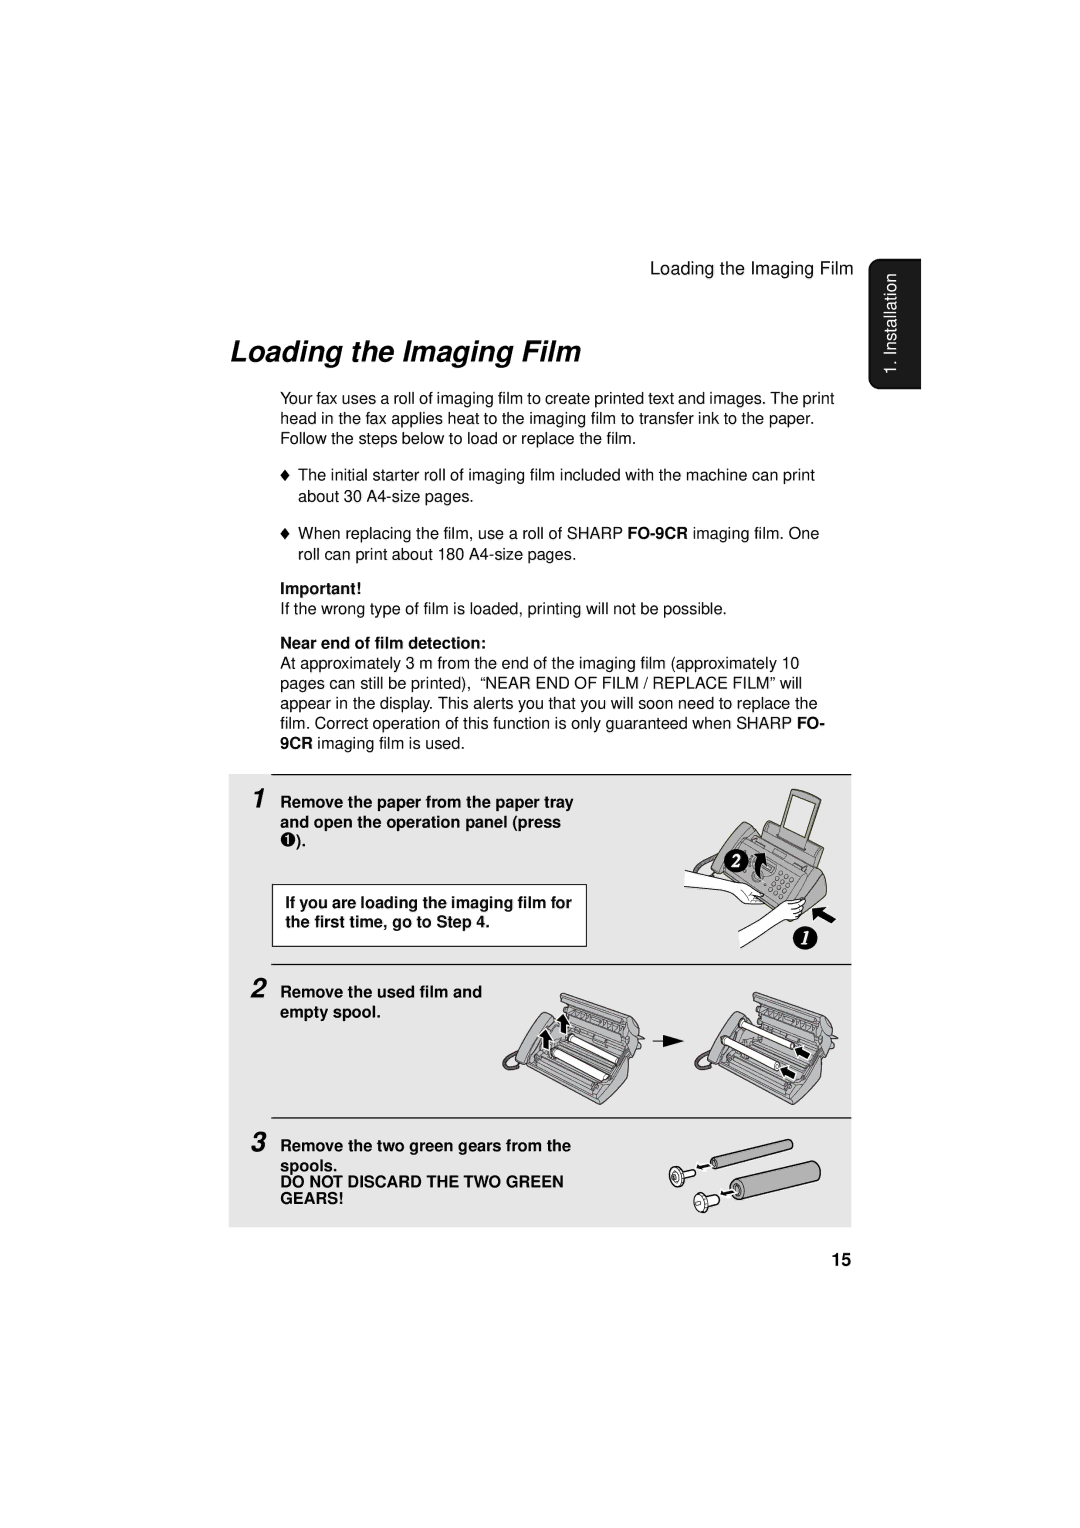 Sharp FO-P610/FO-P630 operation manual Loading the Imaging Film, Near end of film detection 